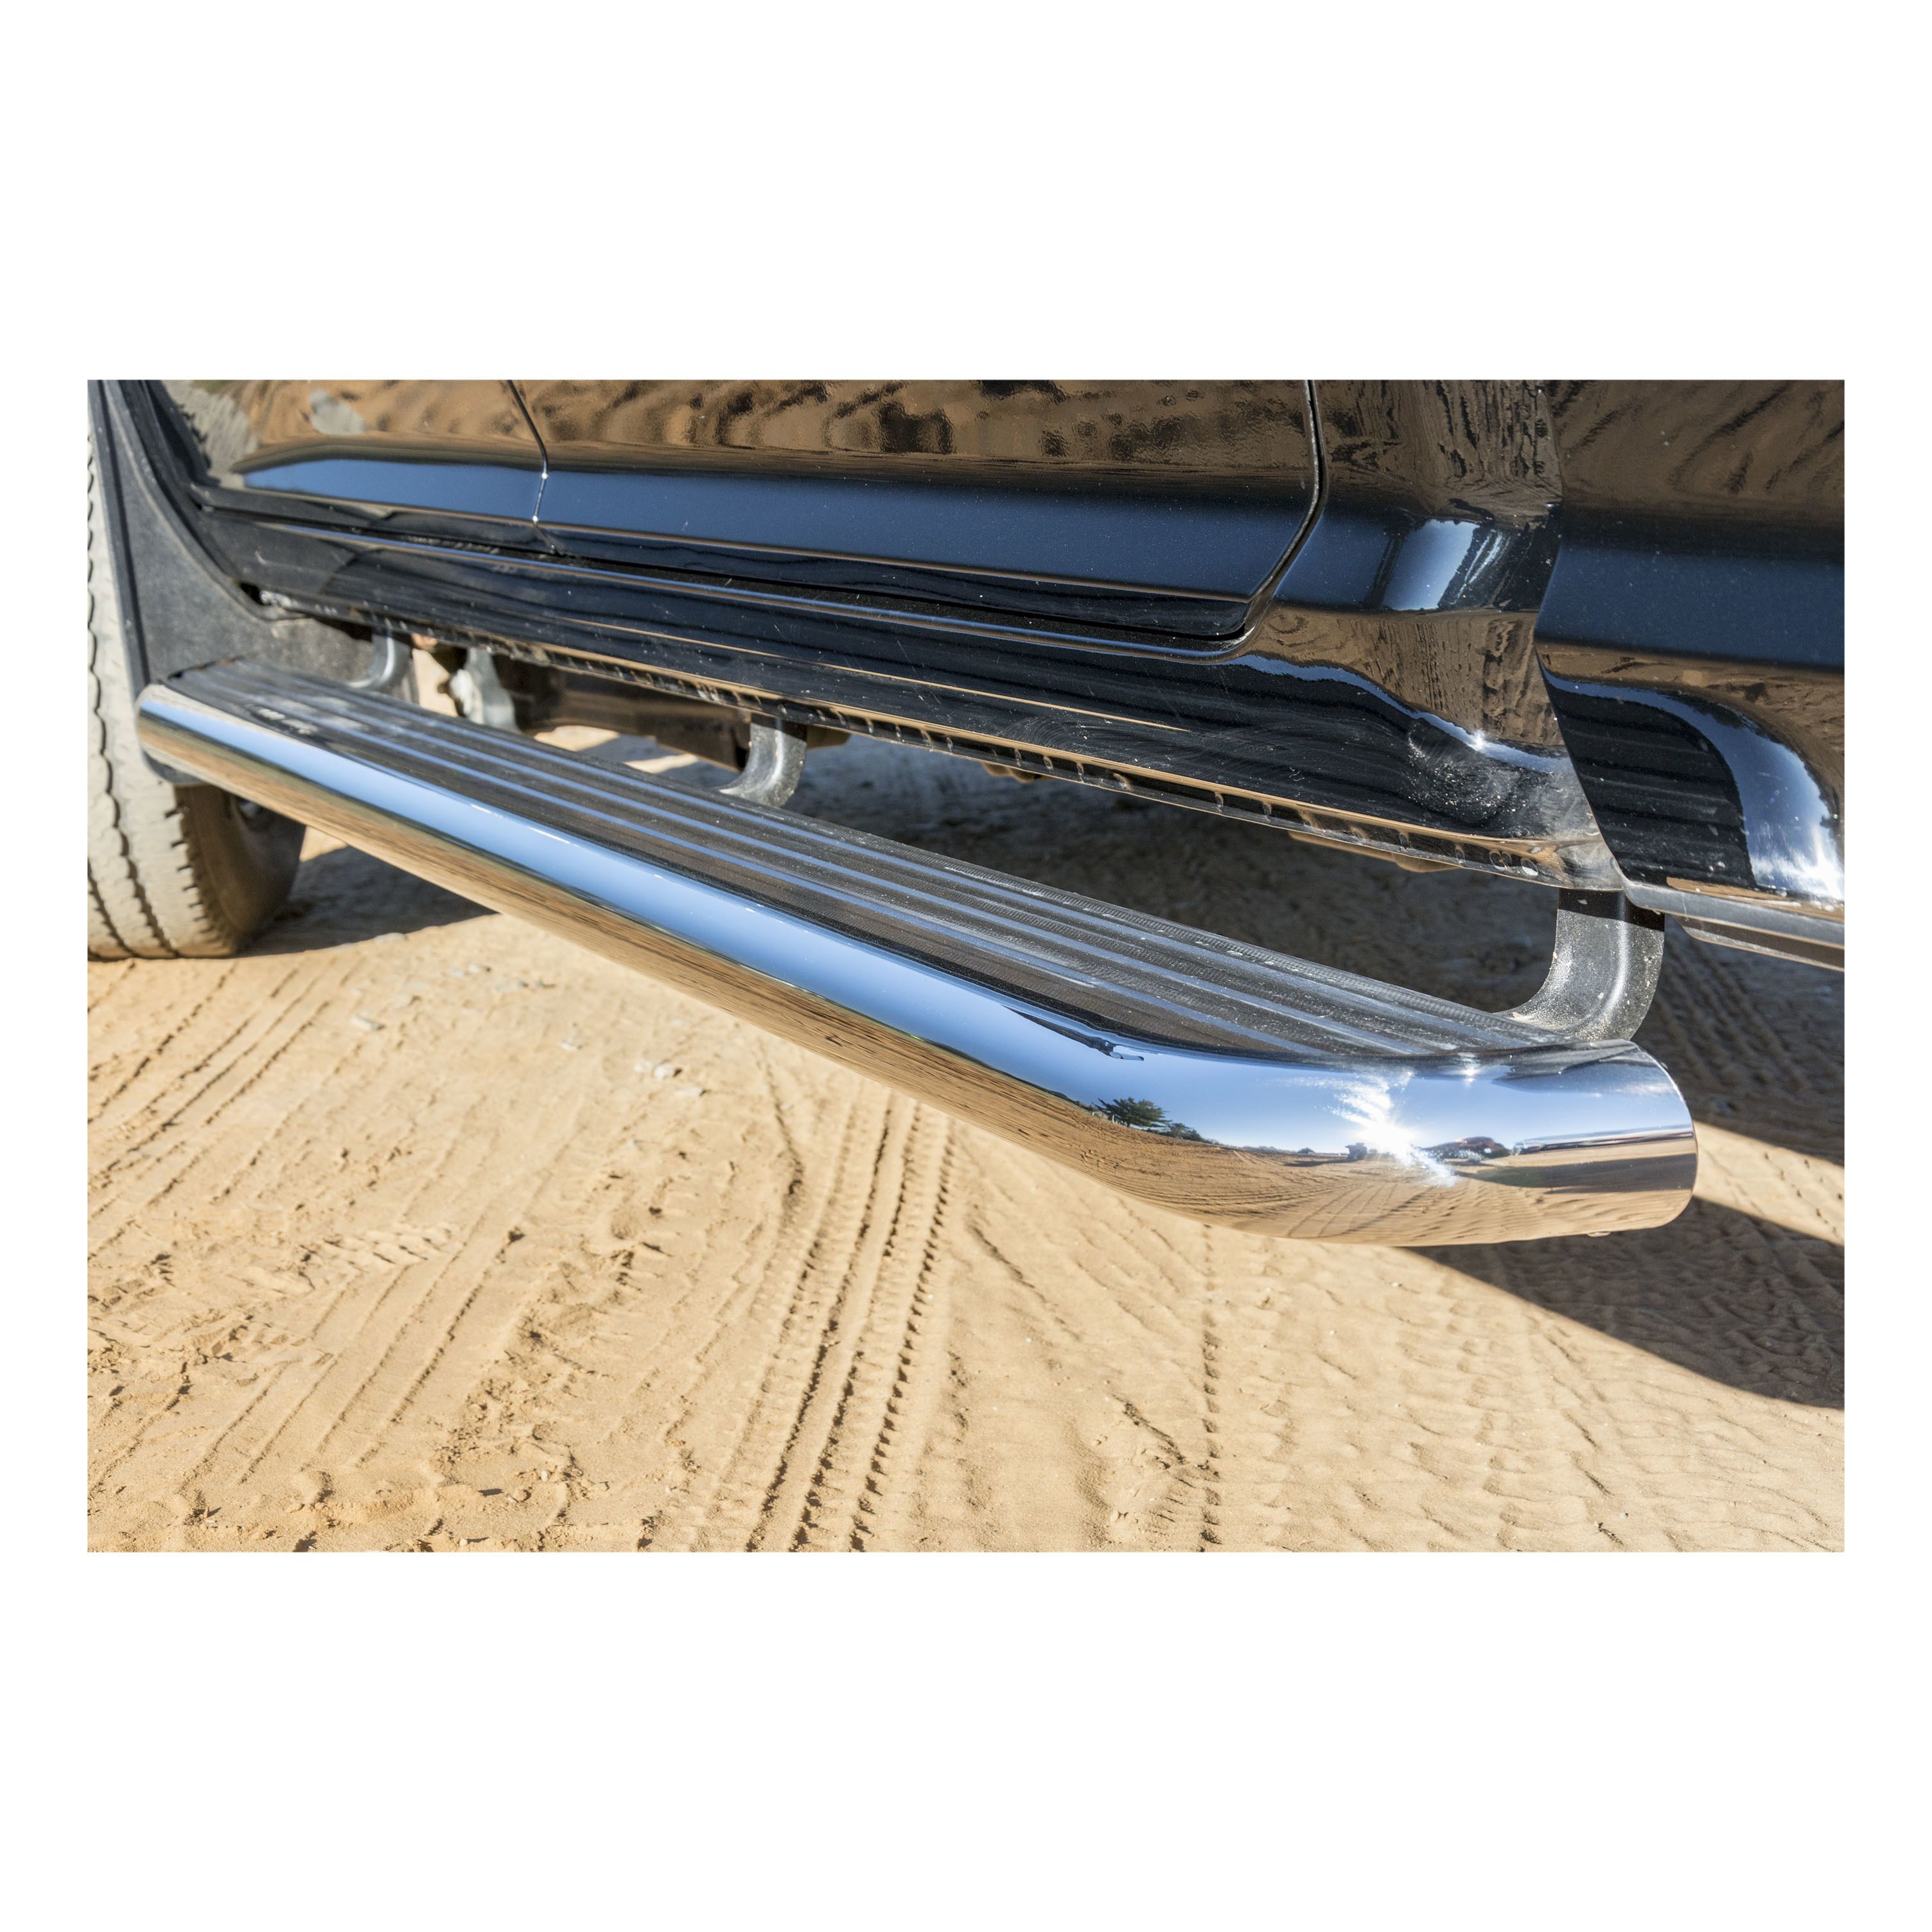 2014-2018 Chevrolet Silverado 1500 Double Cab MegaStep 6 1/2" Running Boards Polished Luverne 2017 Chevy Silverado 1500 Double Cab Running Boards